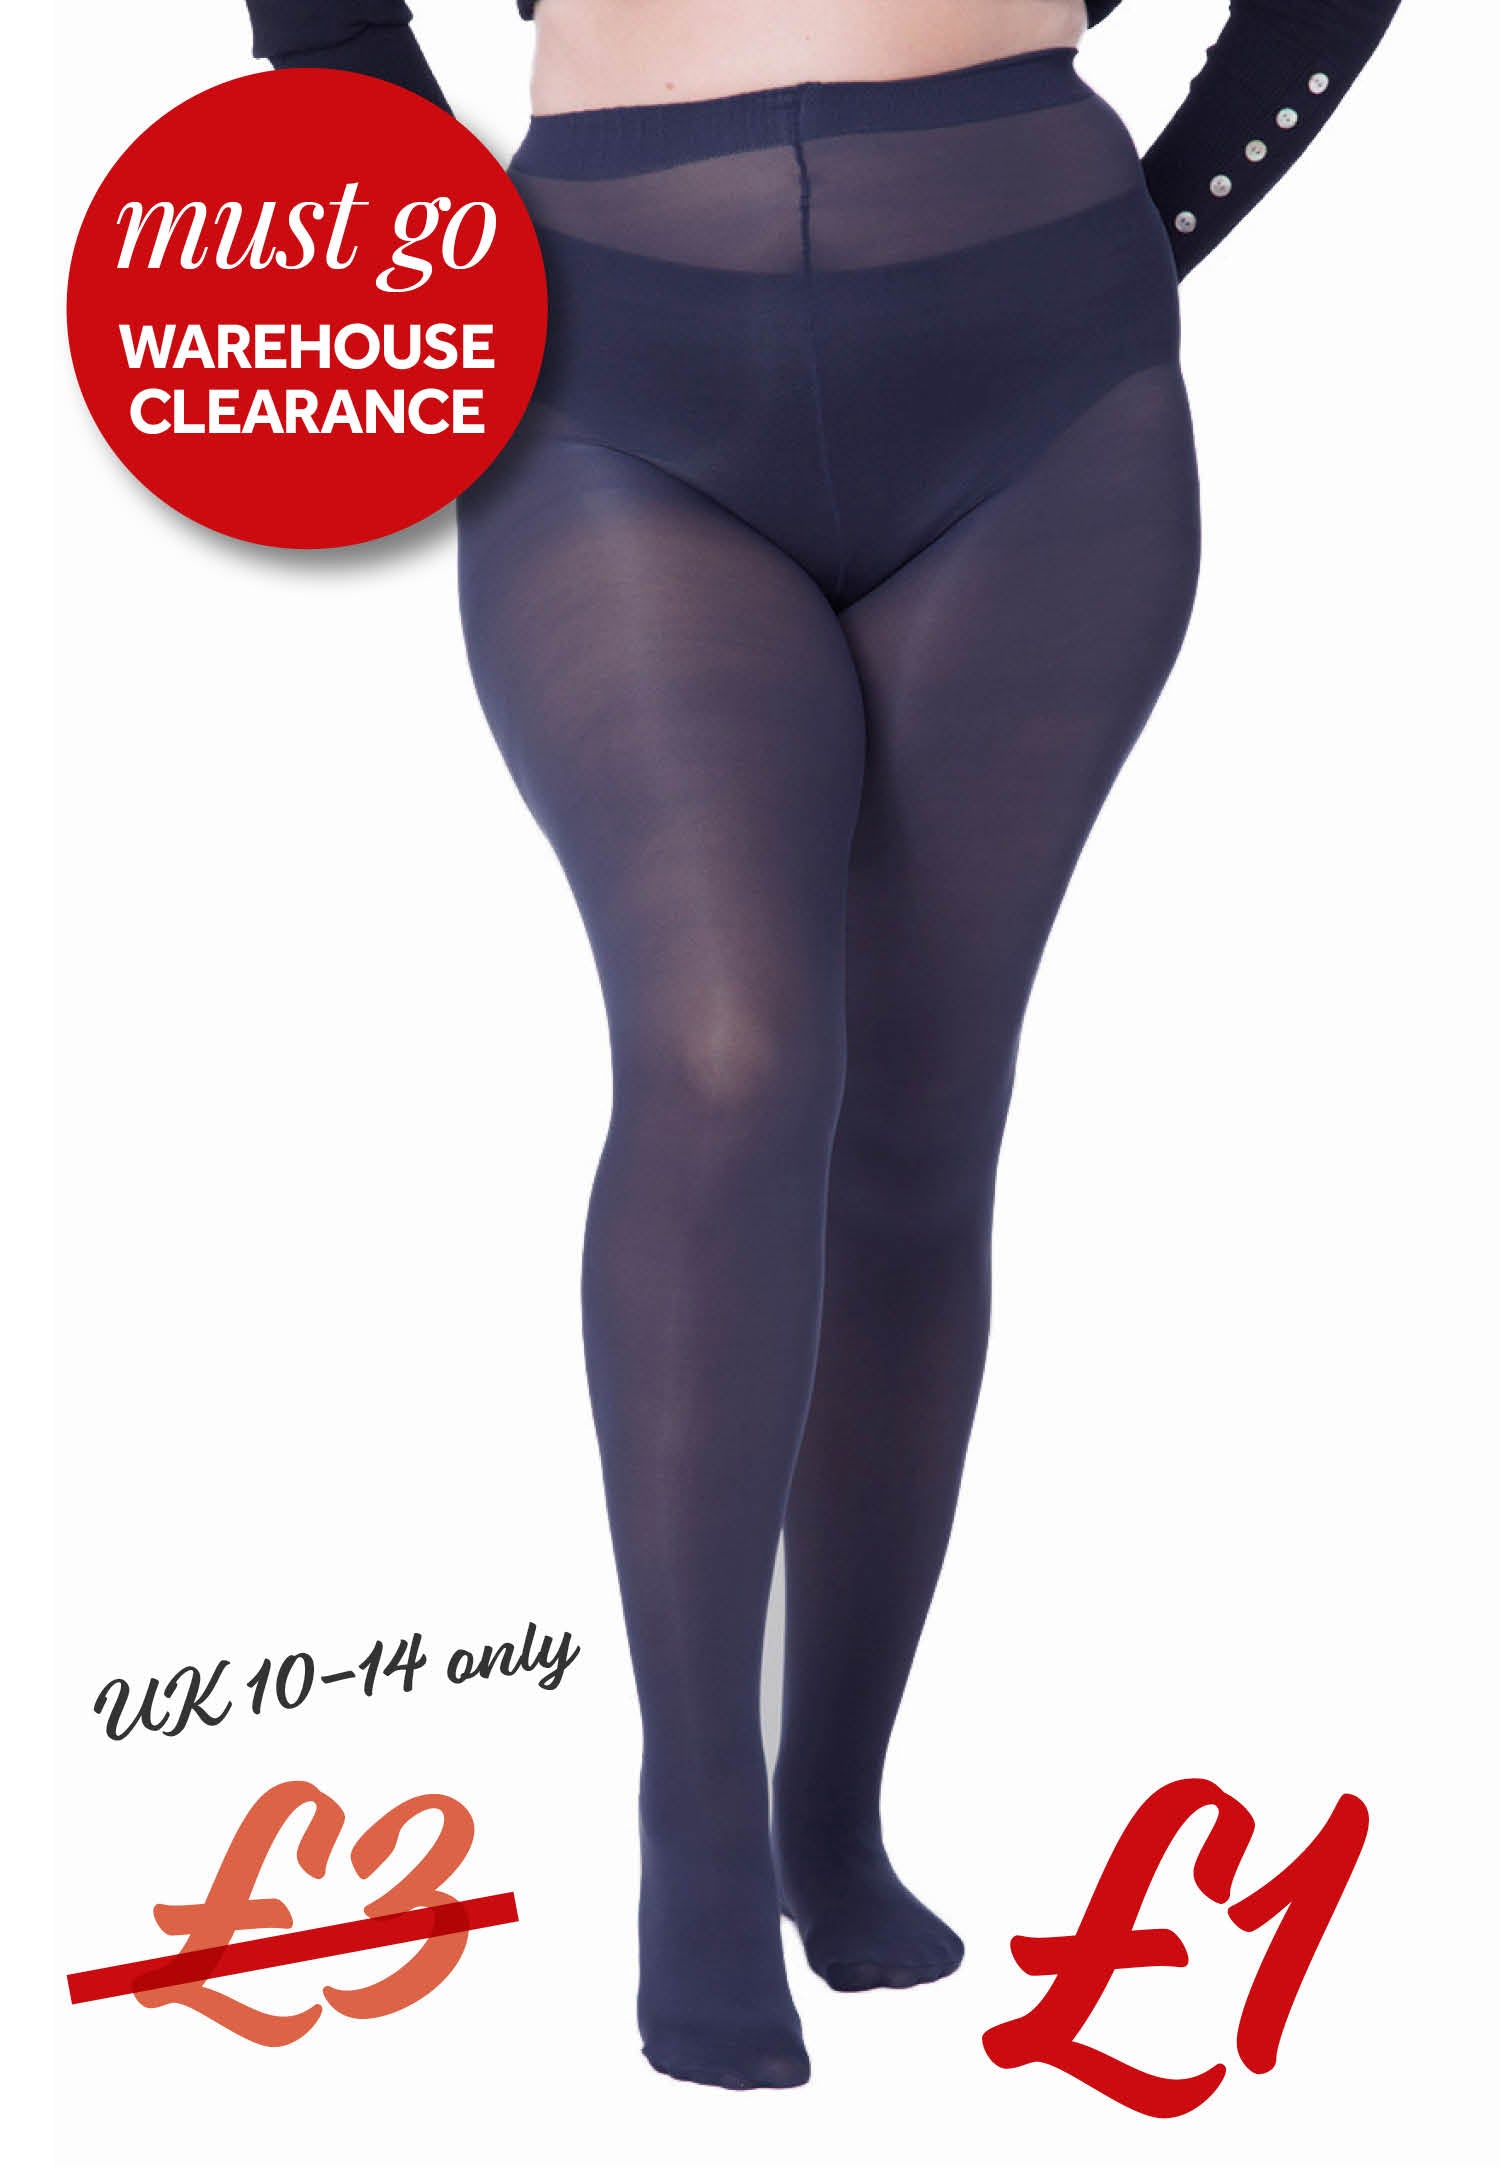 All Woman 20 denier tights – The Big Bloomers Company